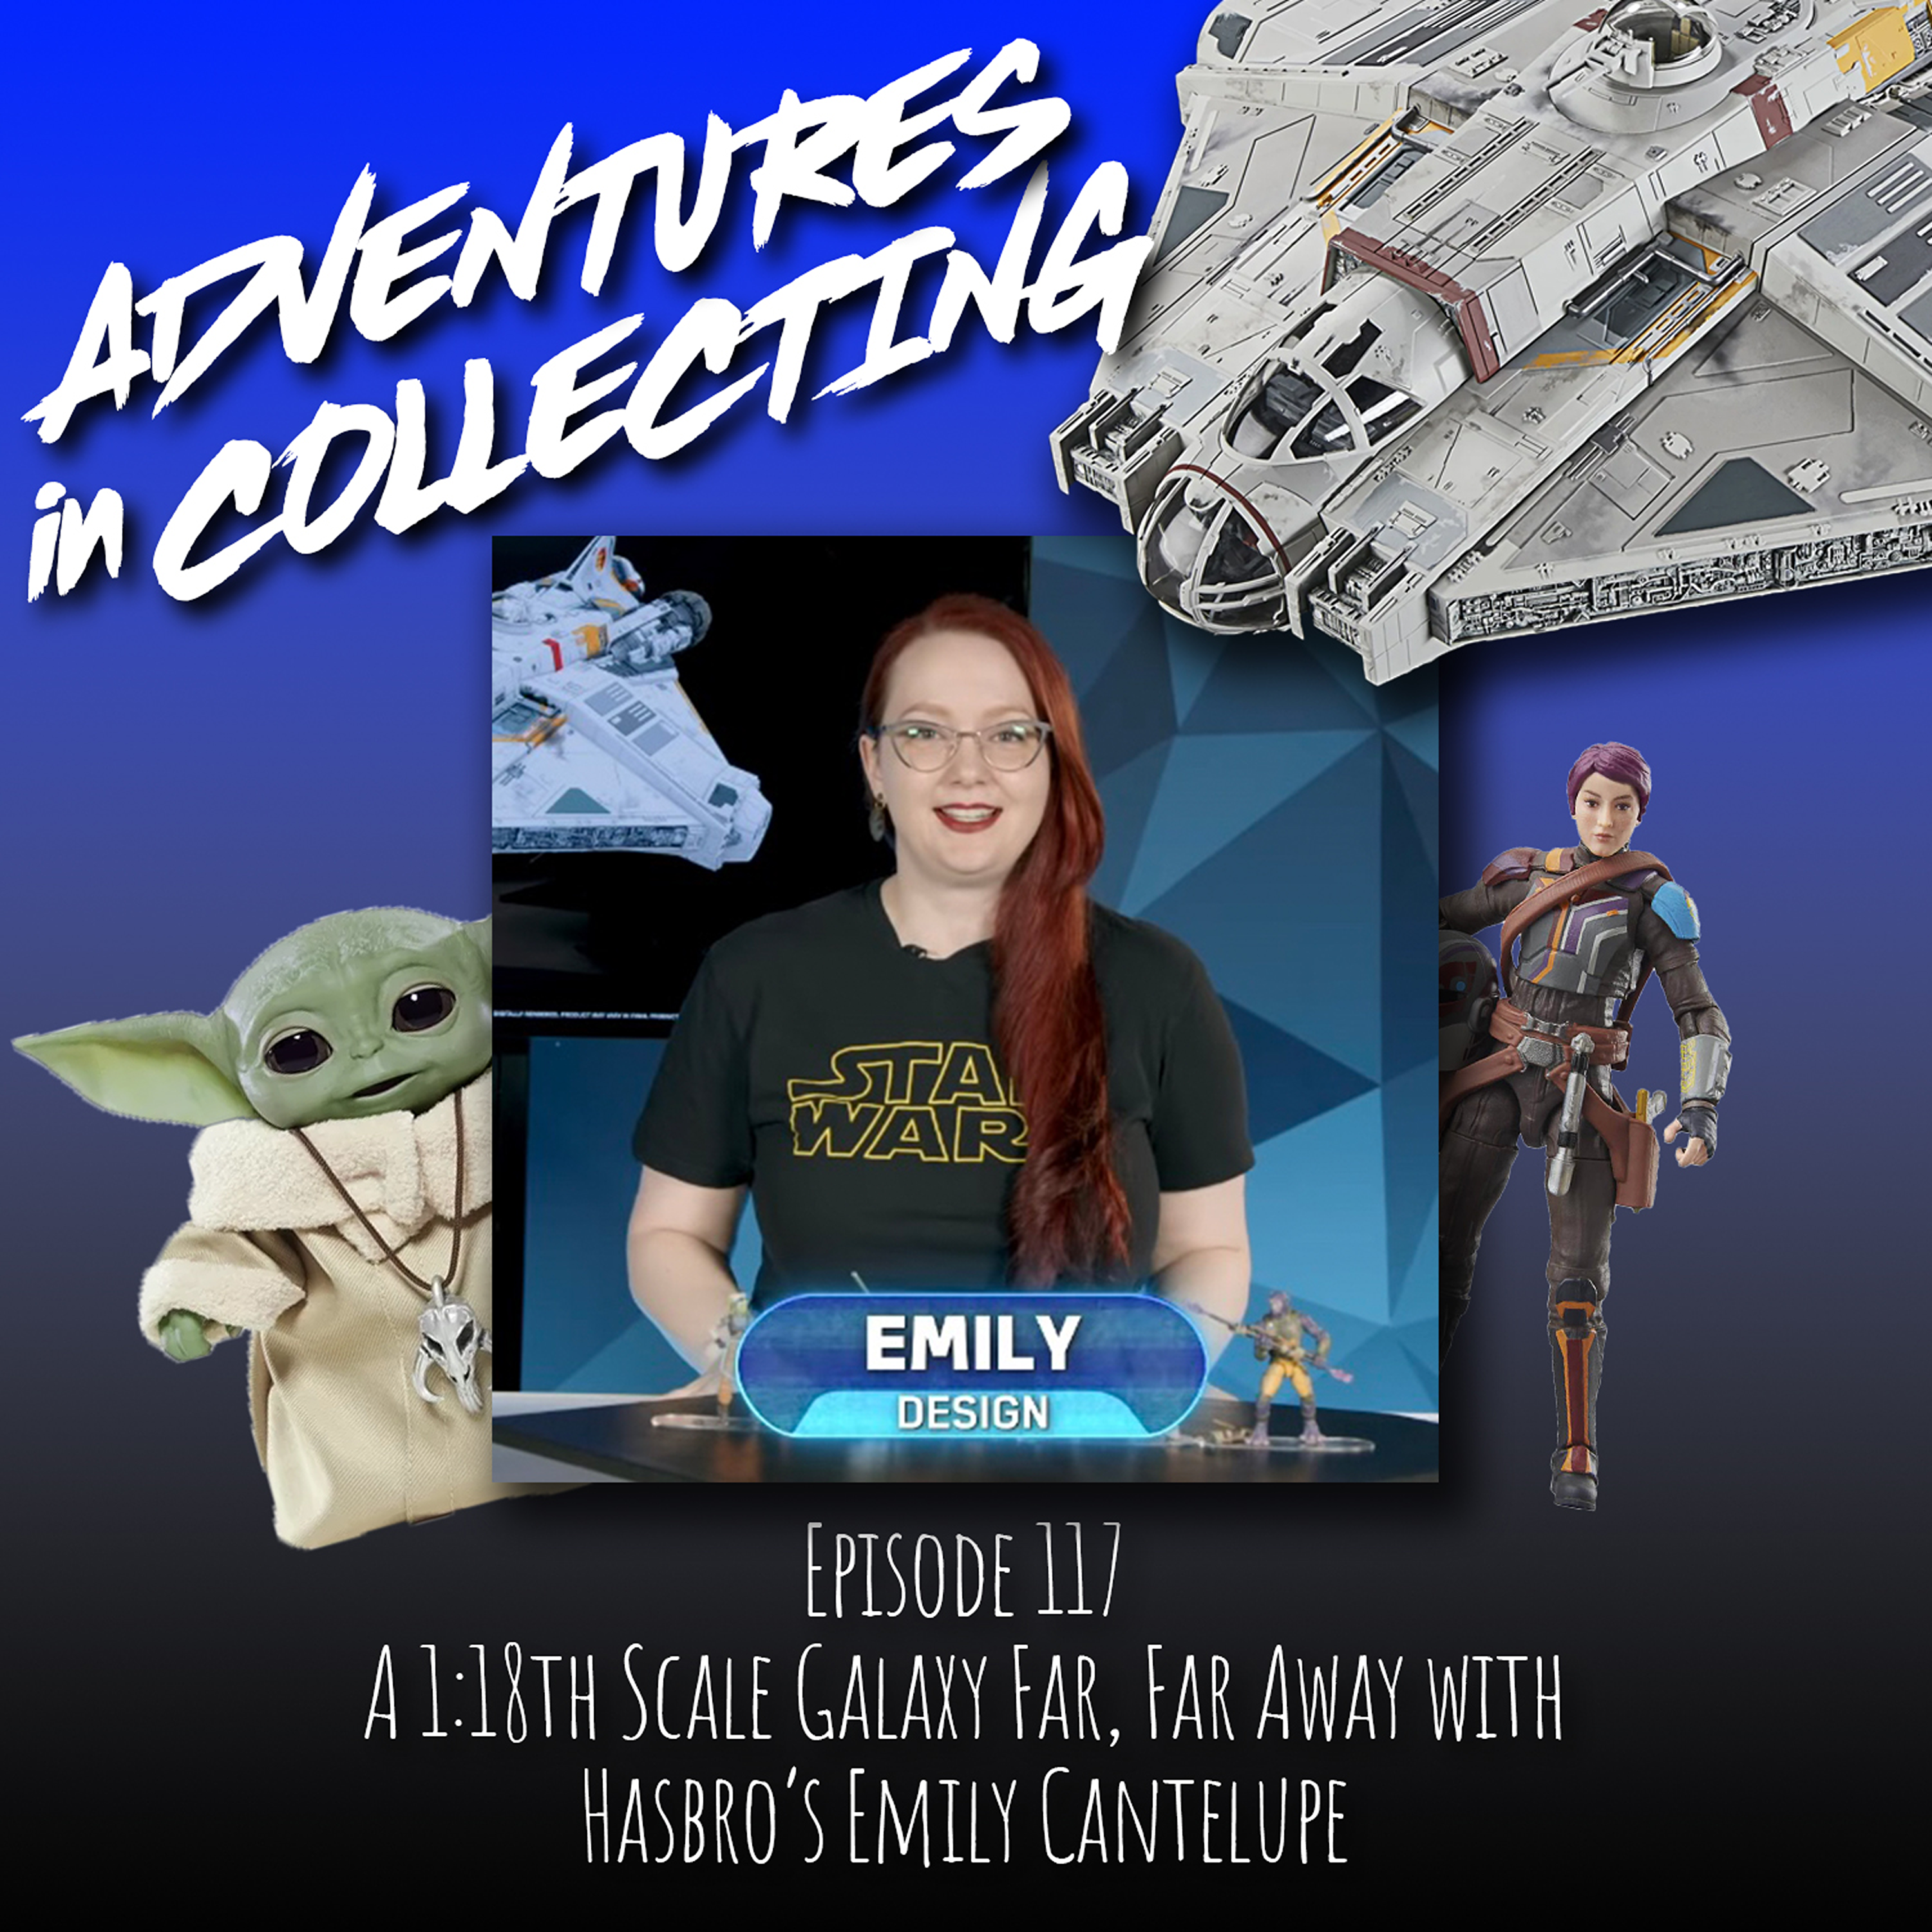 A 1:18th Scale Galaxy Far, Far Away with Hasbro’s Emily Cantelupe